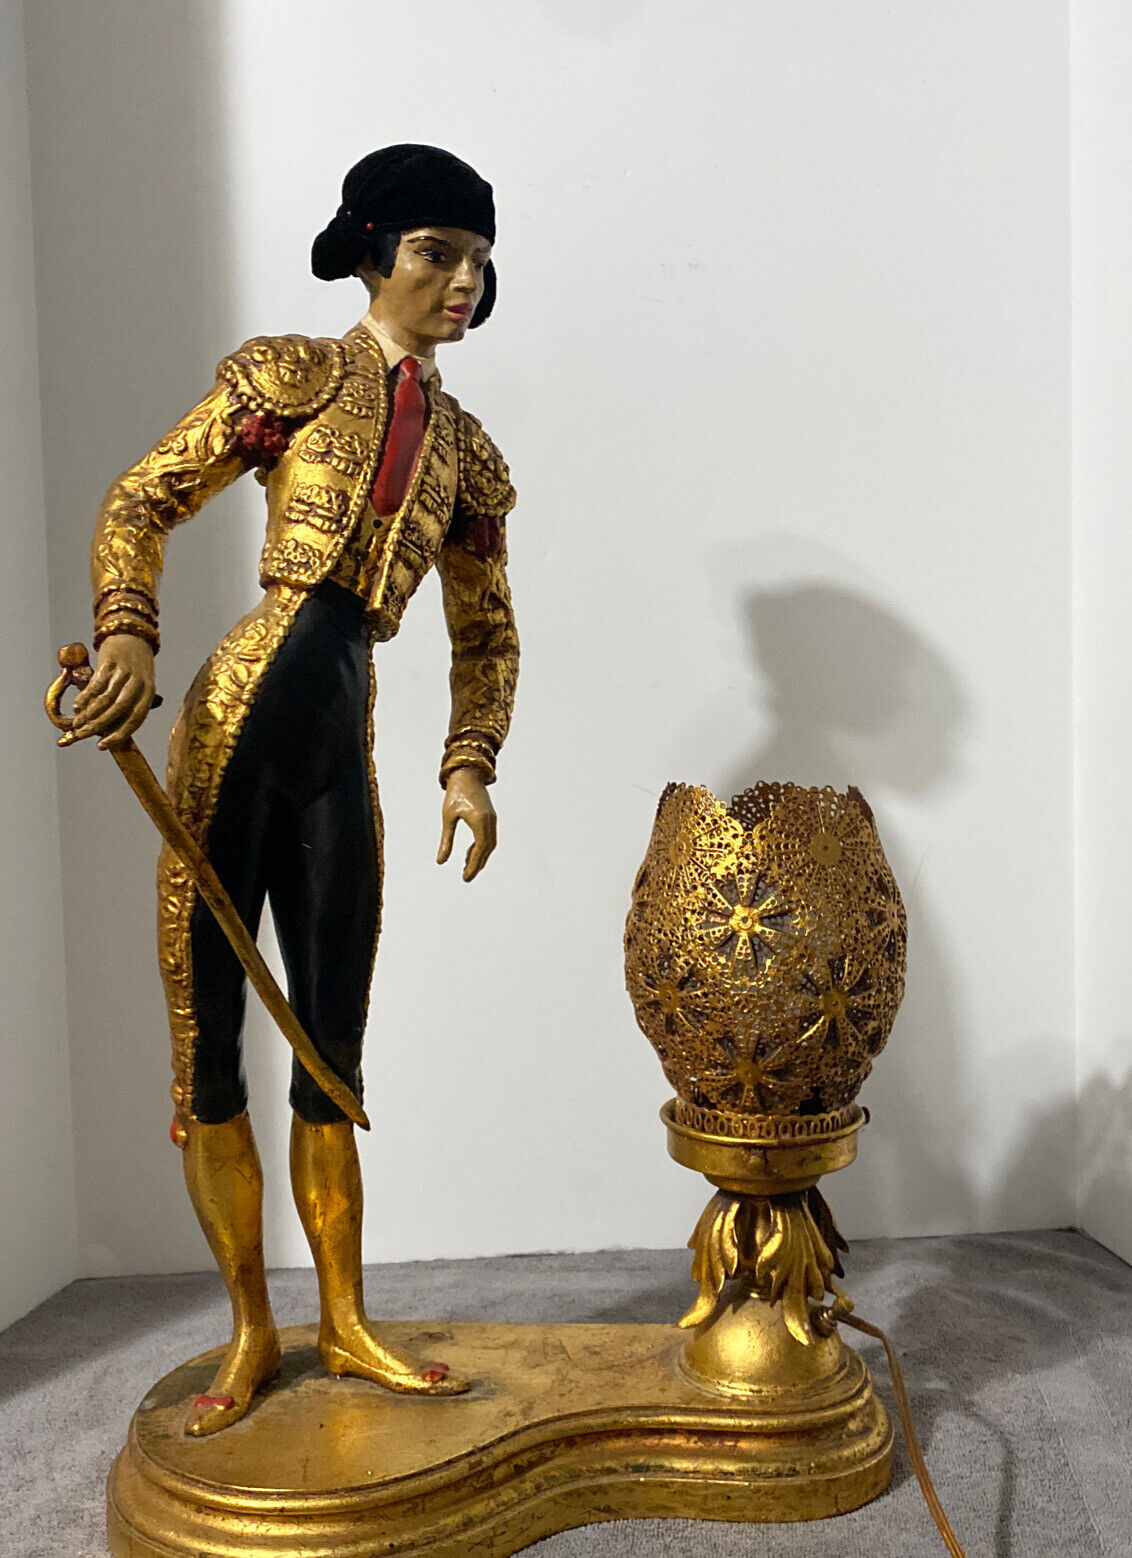 MCM MATADOR BULL FIGHTER FIGURINE with LAMP 2ft tall READ